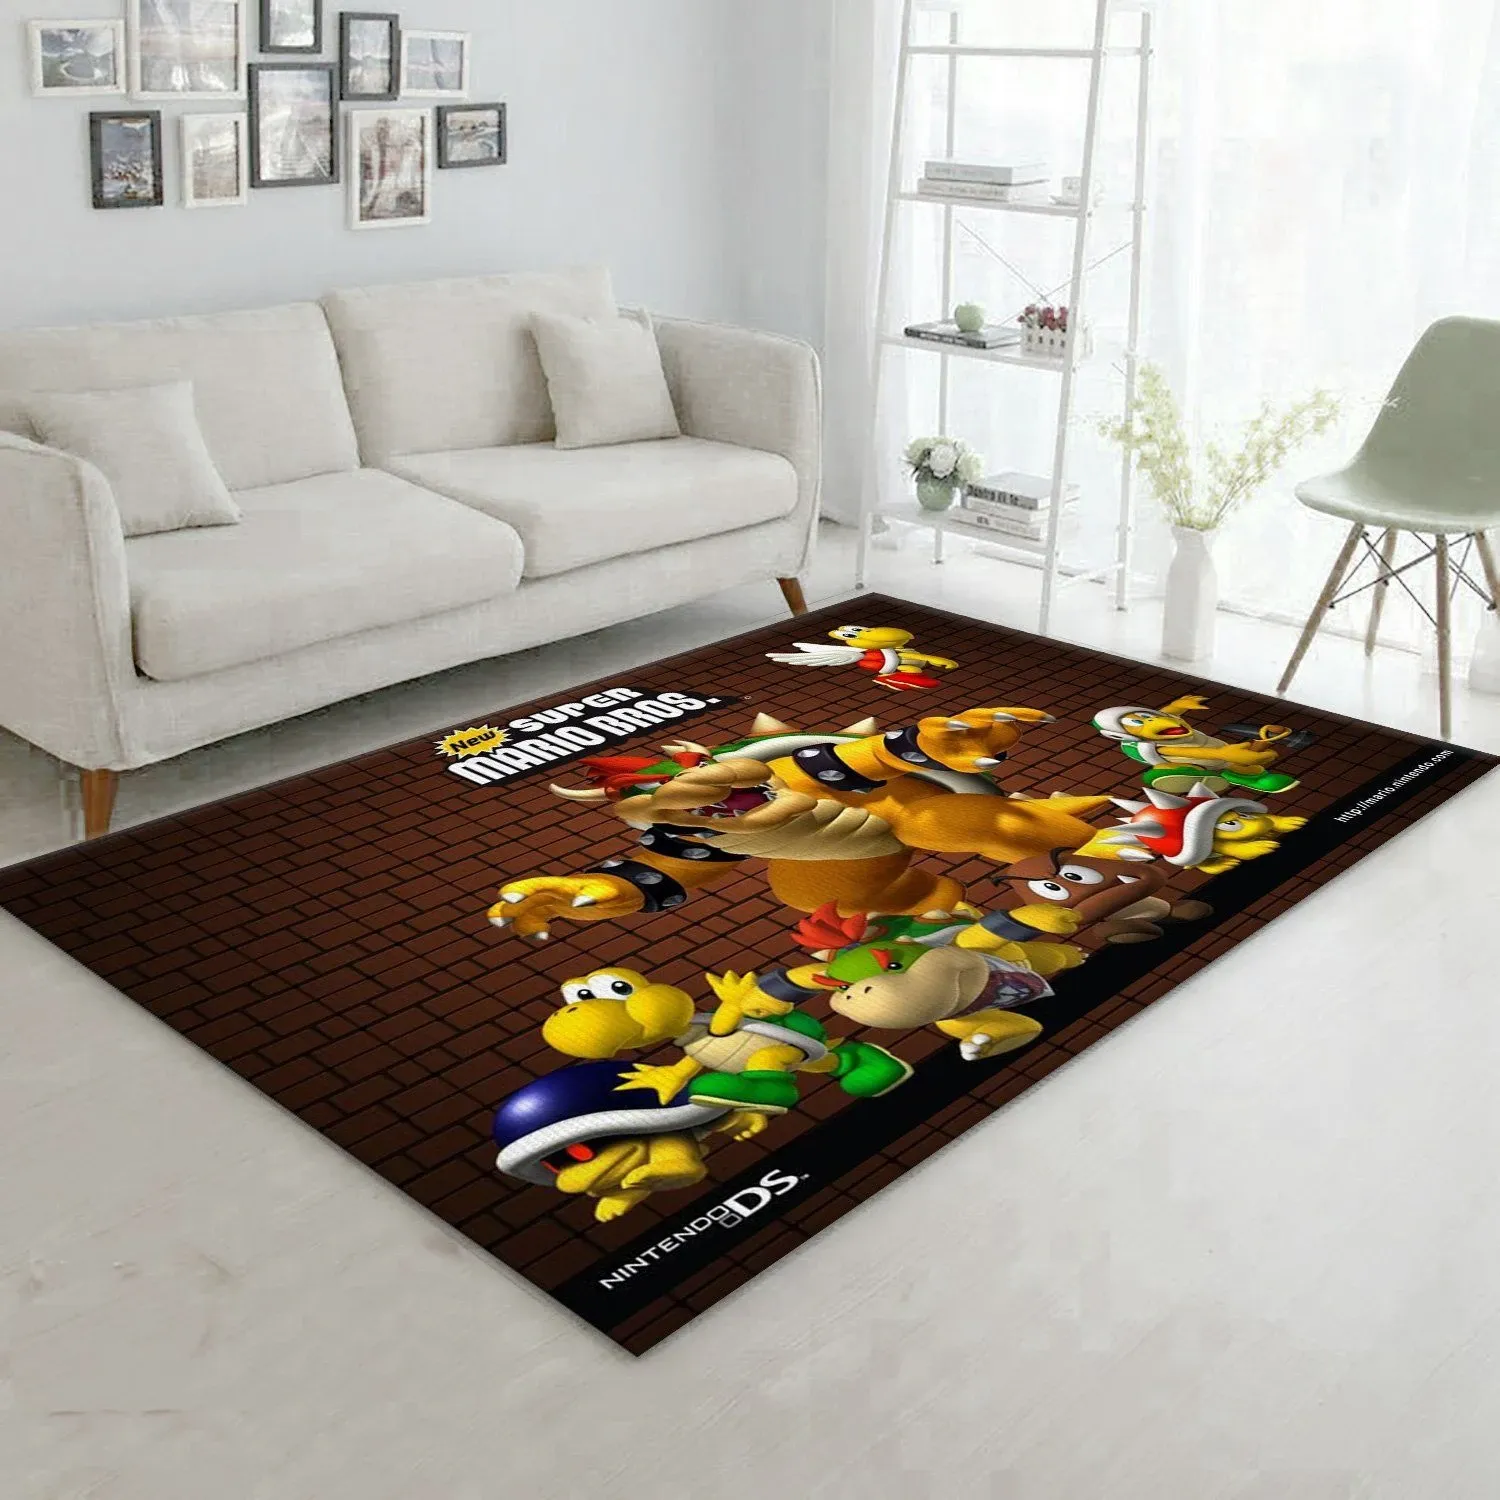 Mario Ver9 Area Rug For Christmas Living Room Rug Family Gift US Decor - Indoor Outdoor Rugs 2